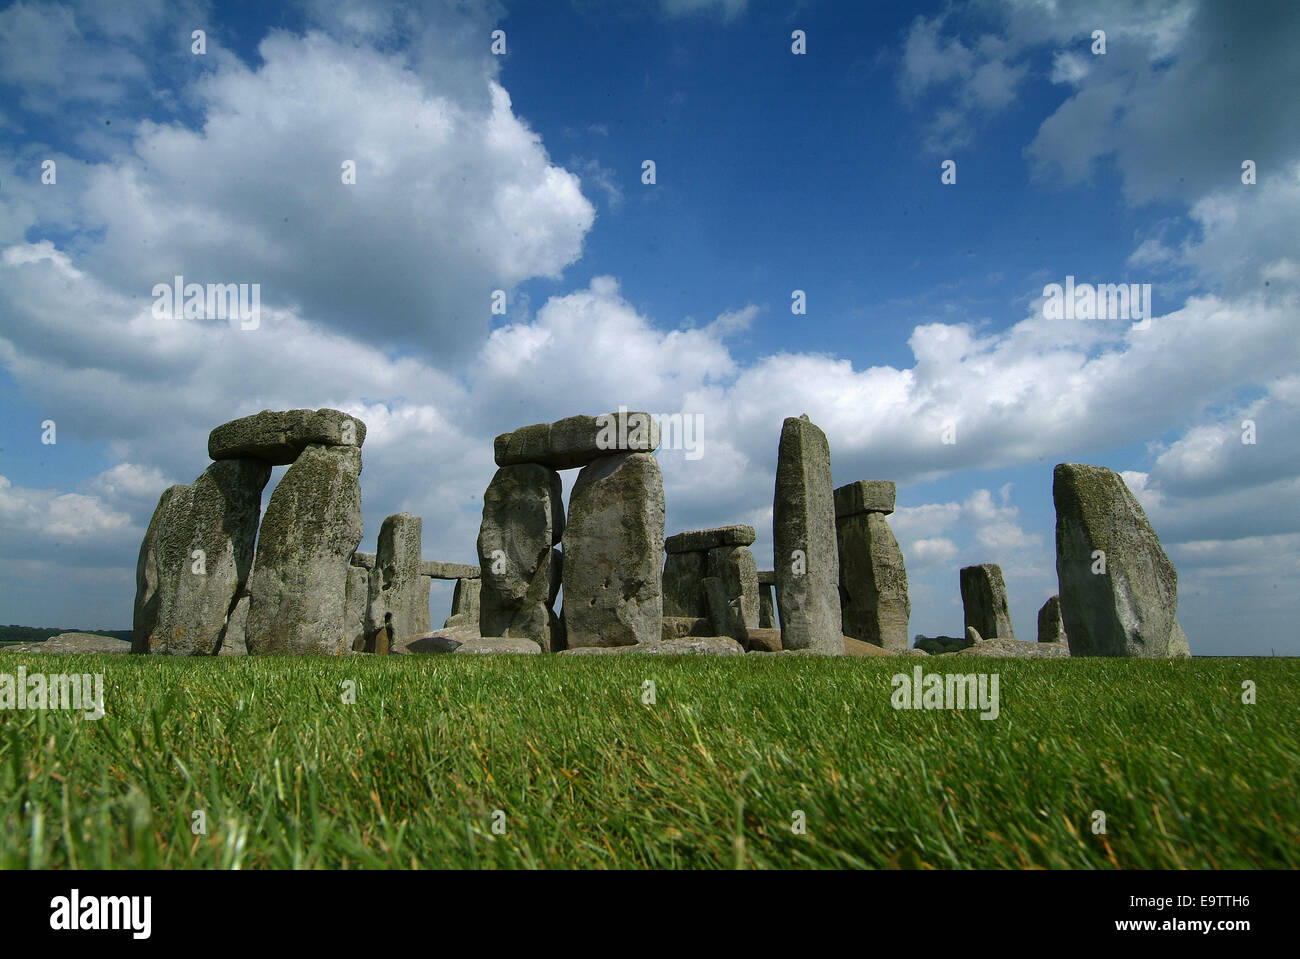 Stonehenge a prehistoric stone circle in Wiltshire,UK,the monument is operated by English Heritage.a UK'Salisbury Plain' Stock Photo